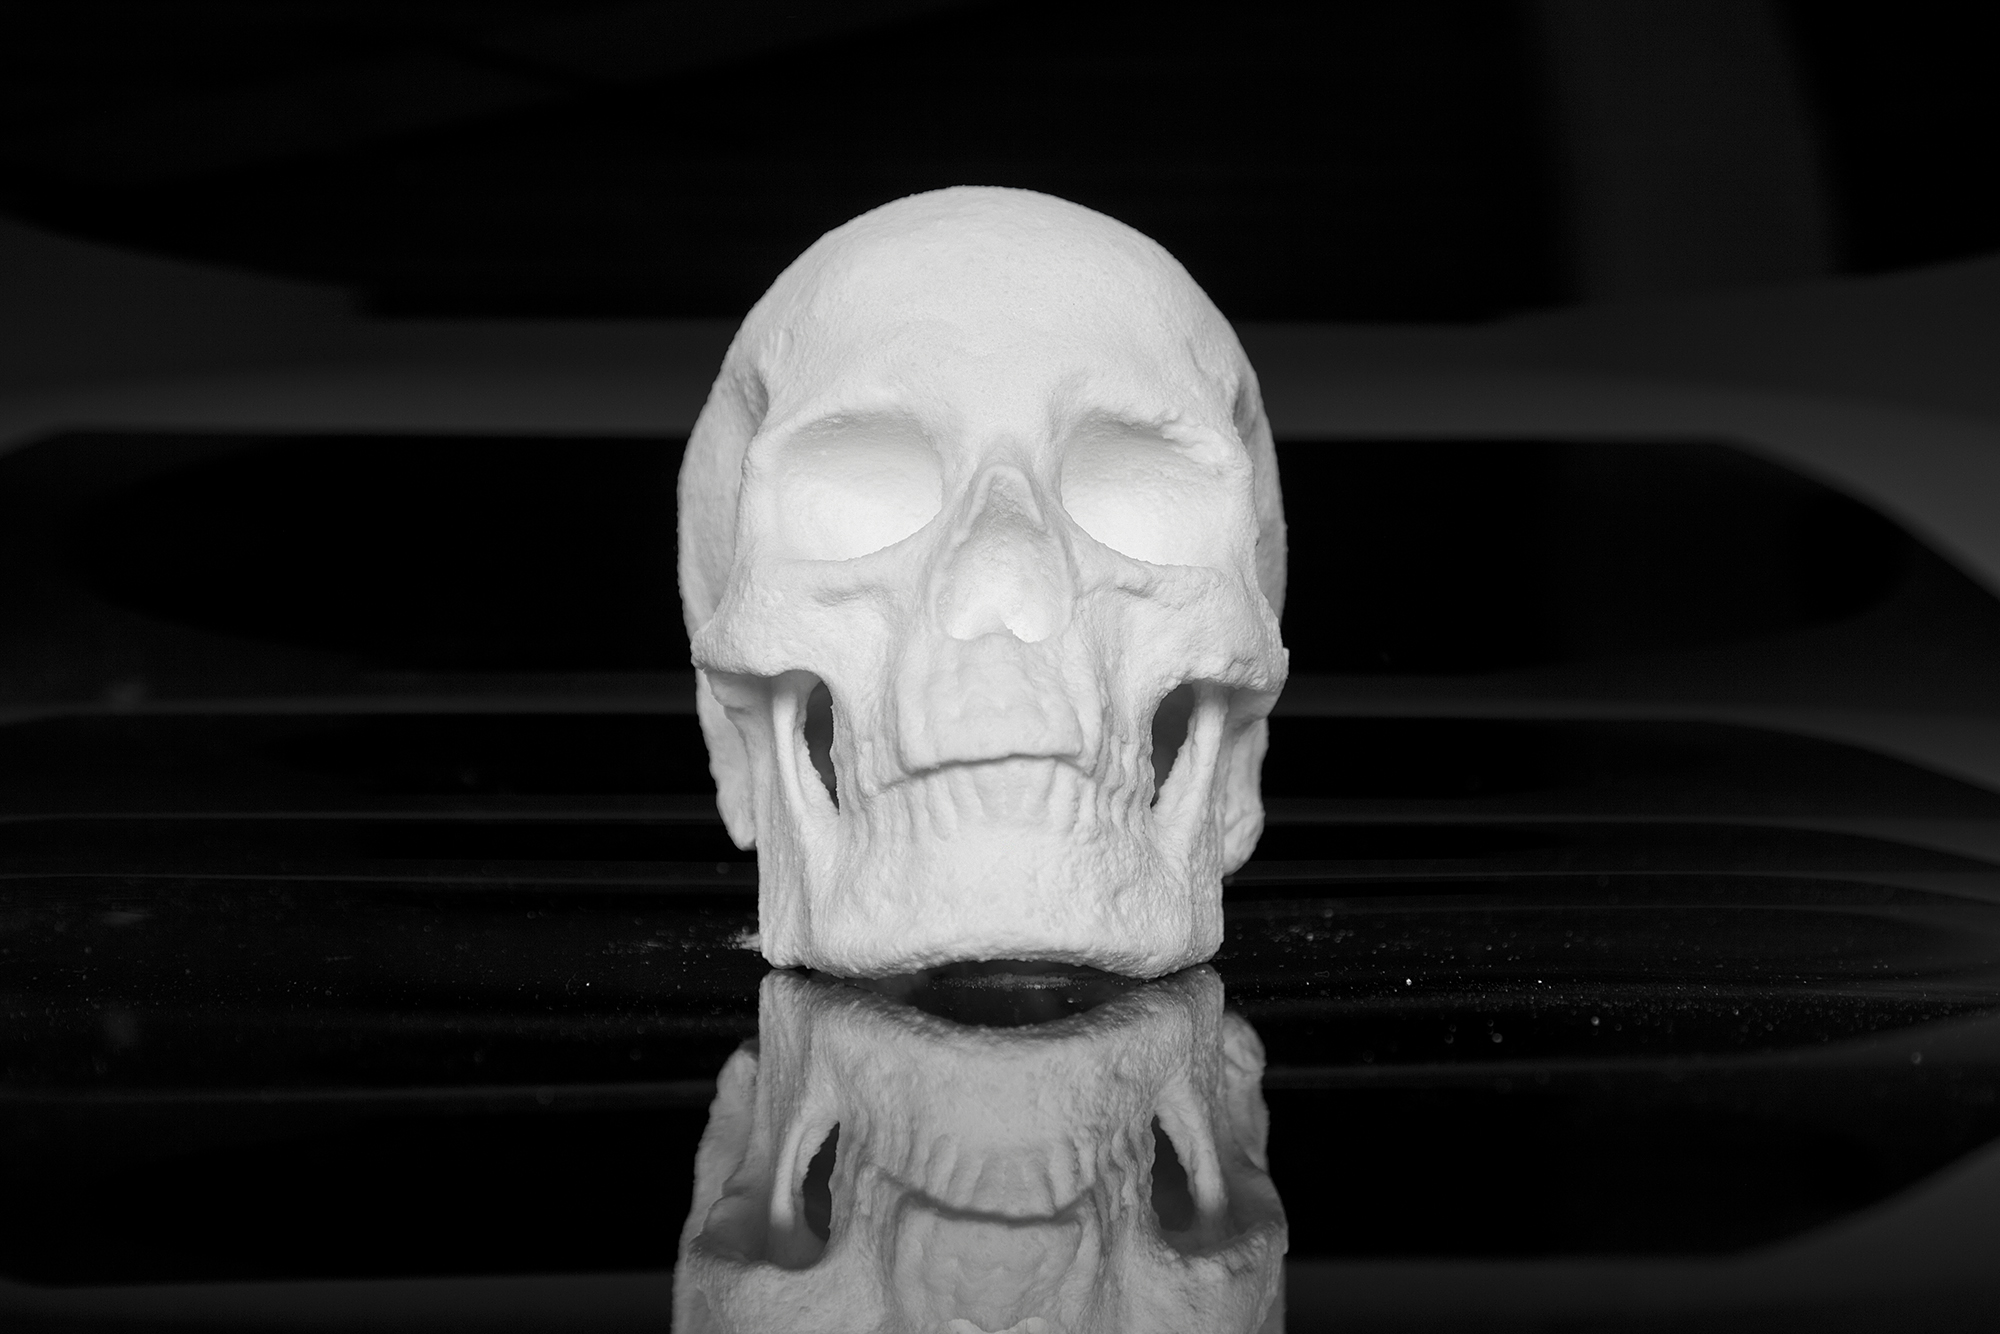 Ecce Animal by artist Diddo | conceptual art | skull made from cocaine | cocaine art